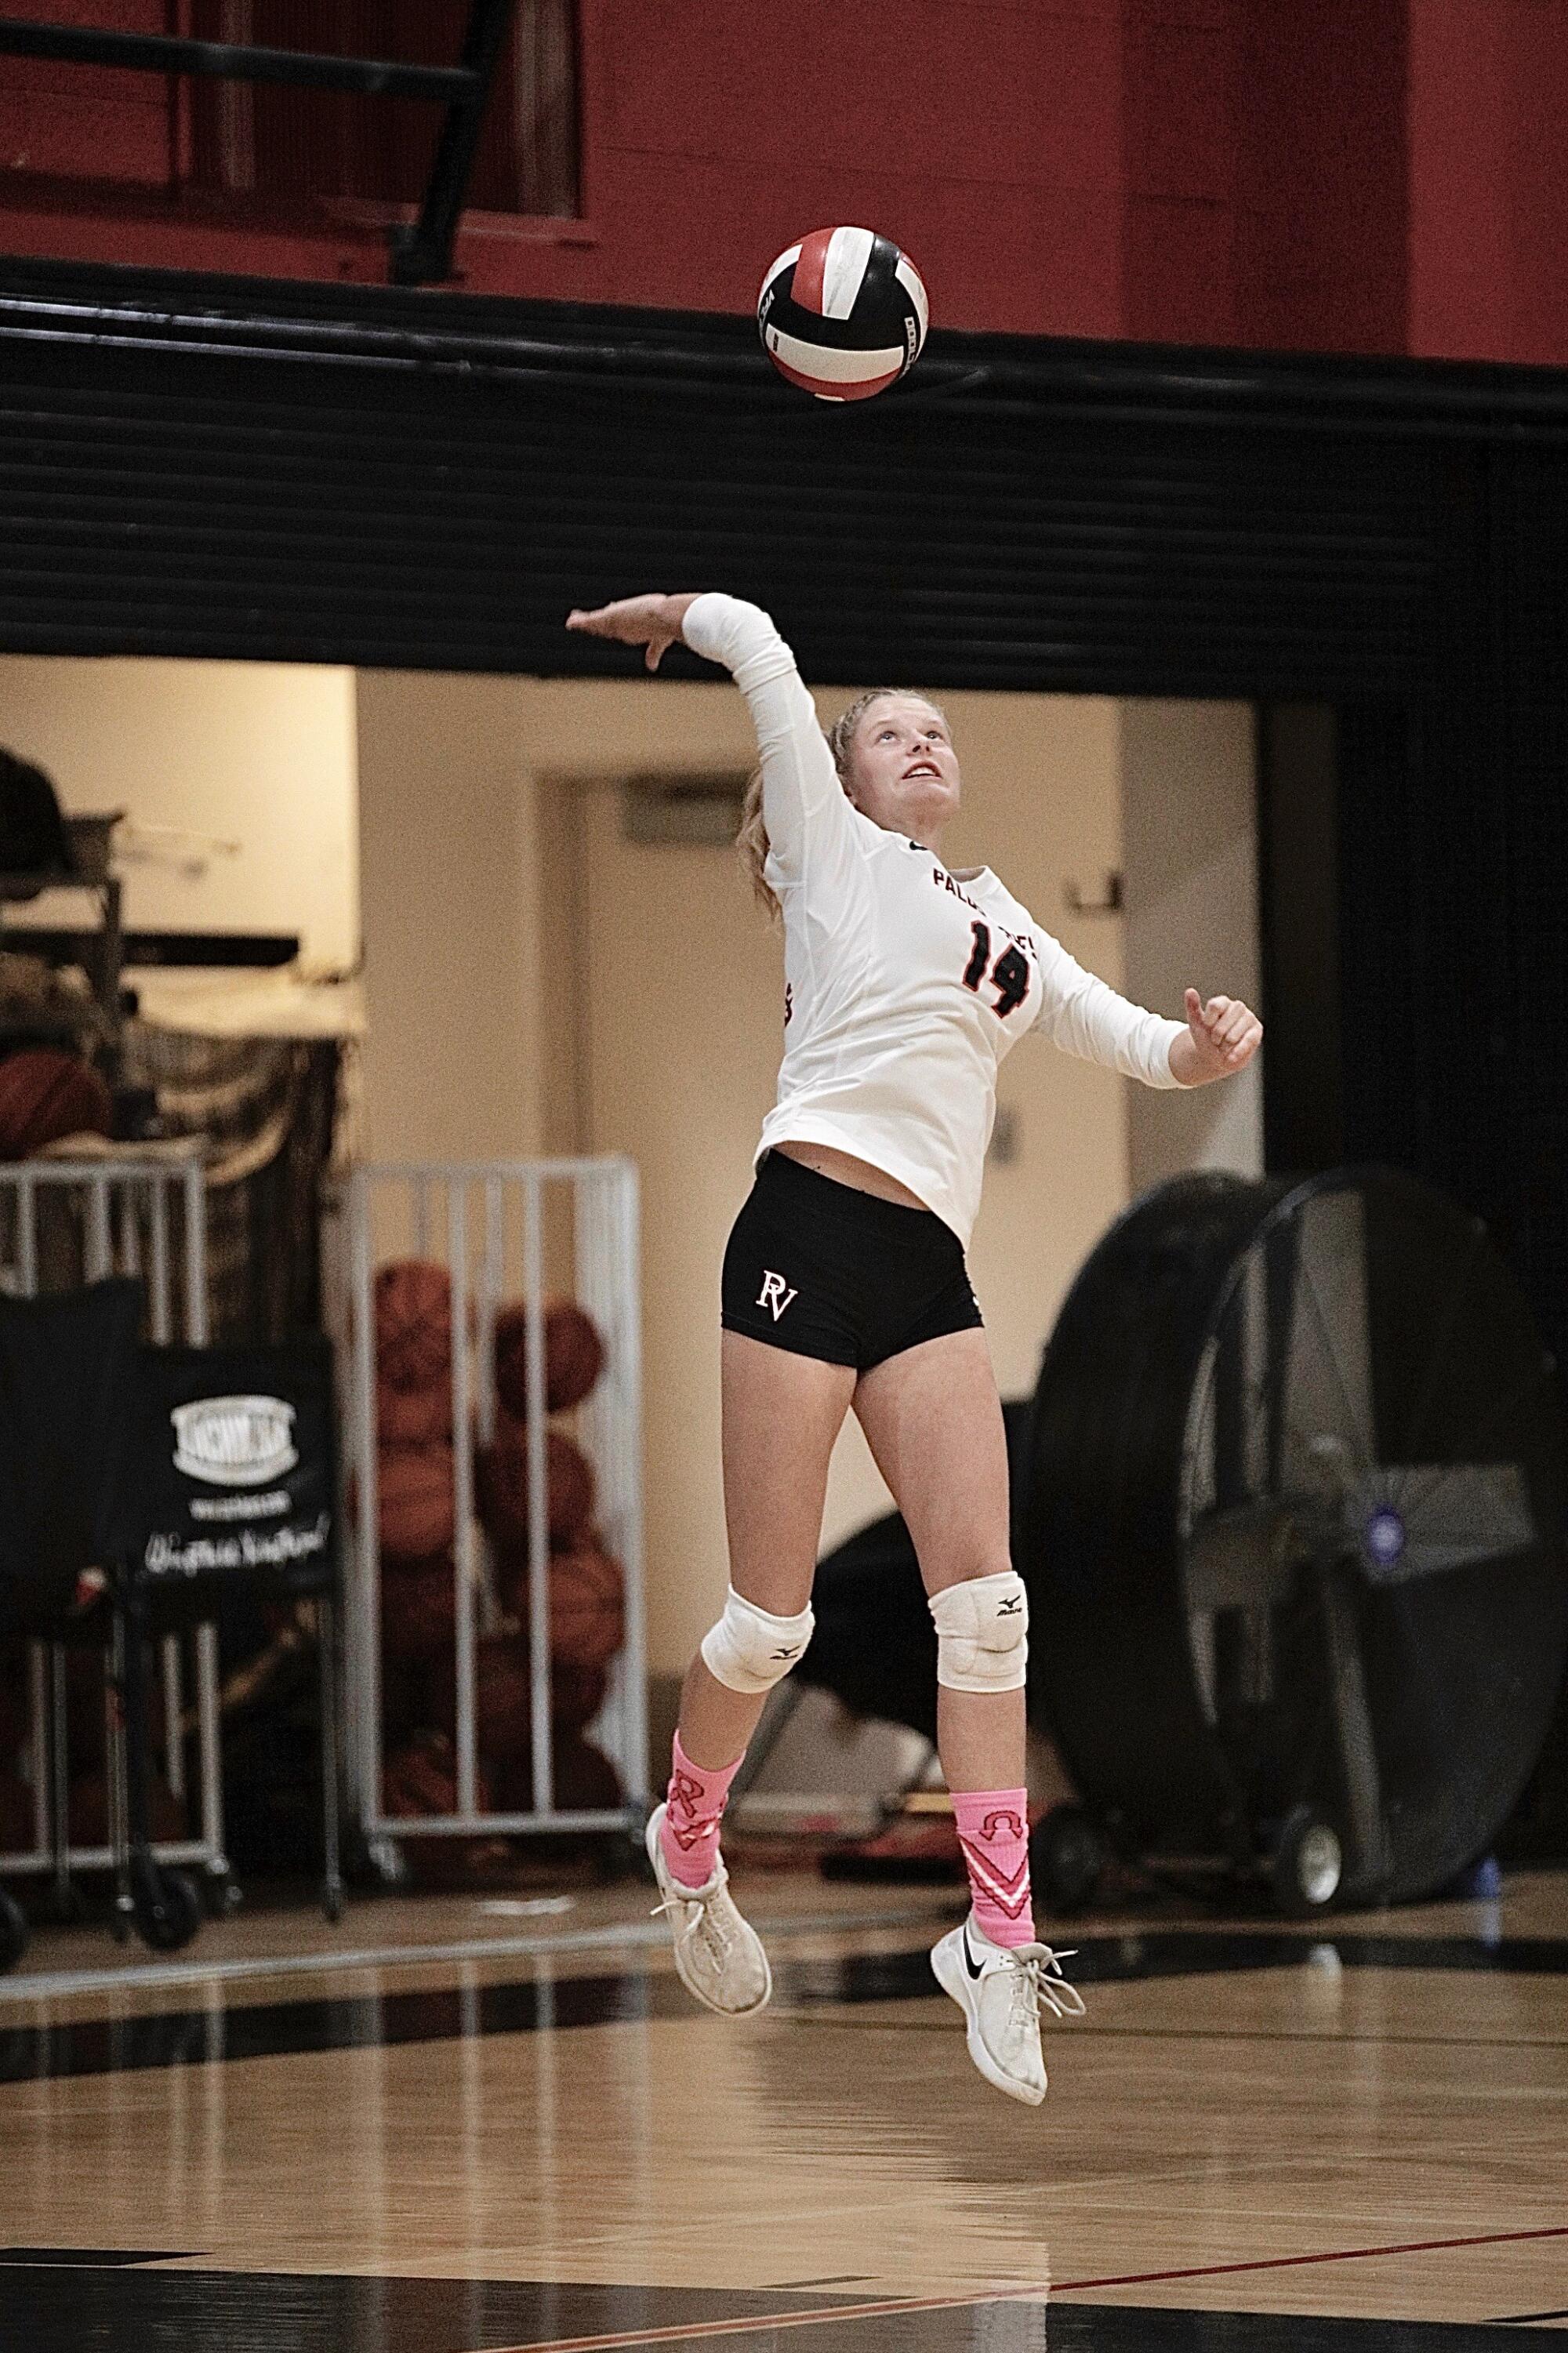 A girl leaps up to hit a volleyball.